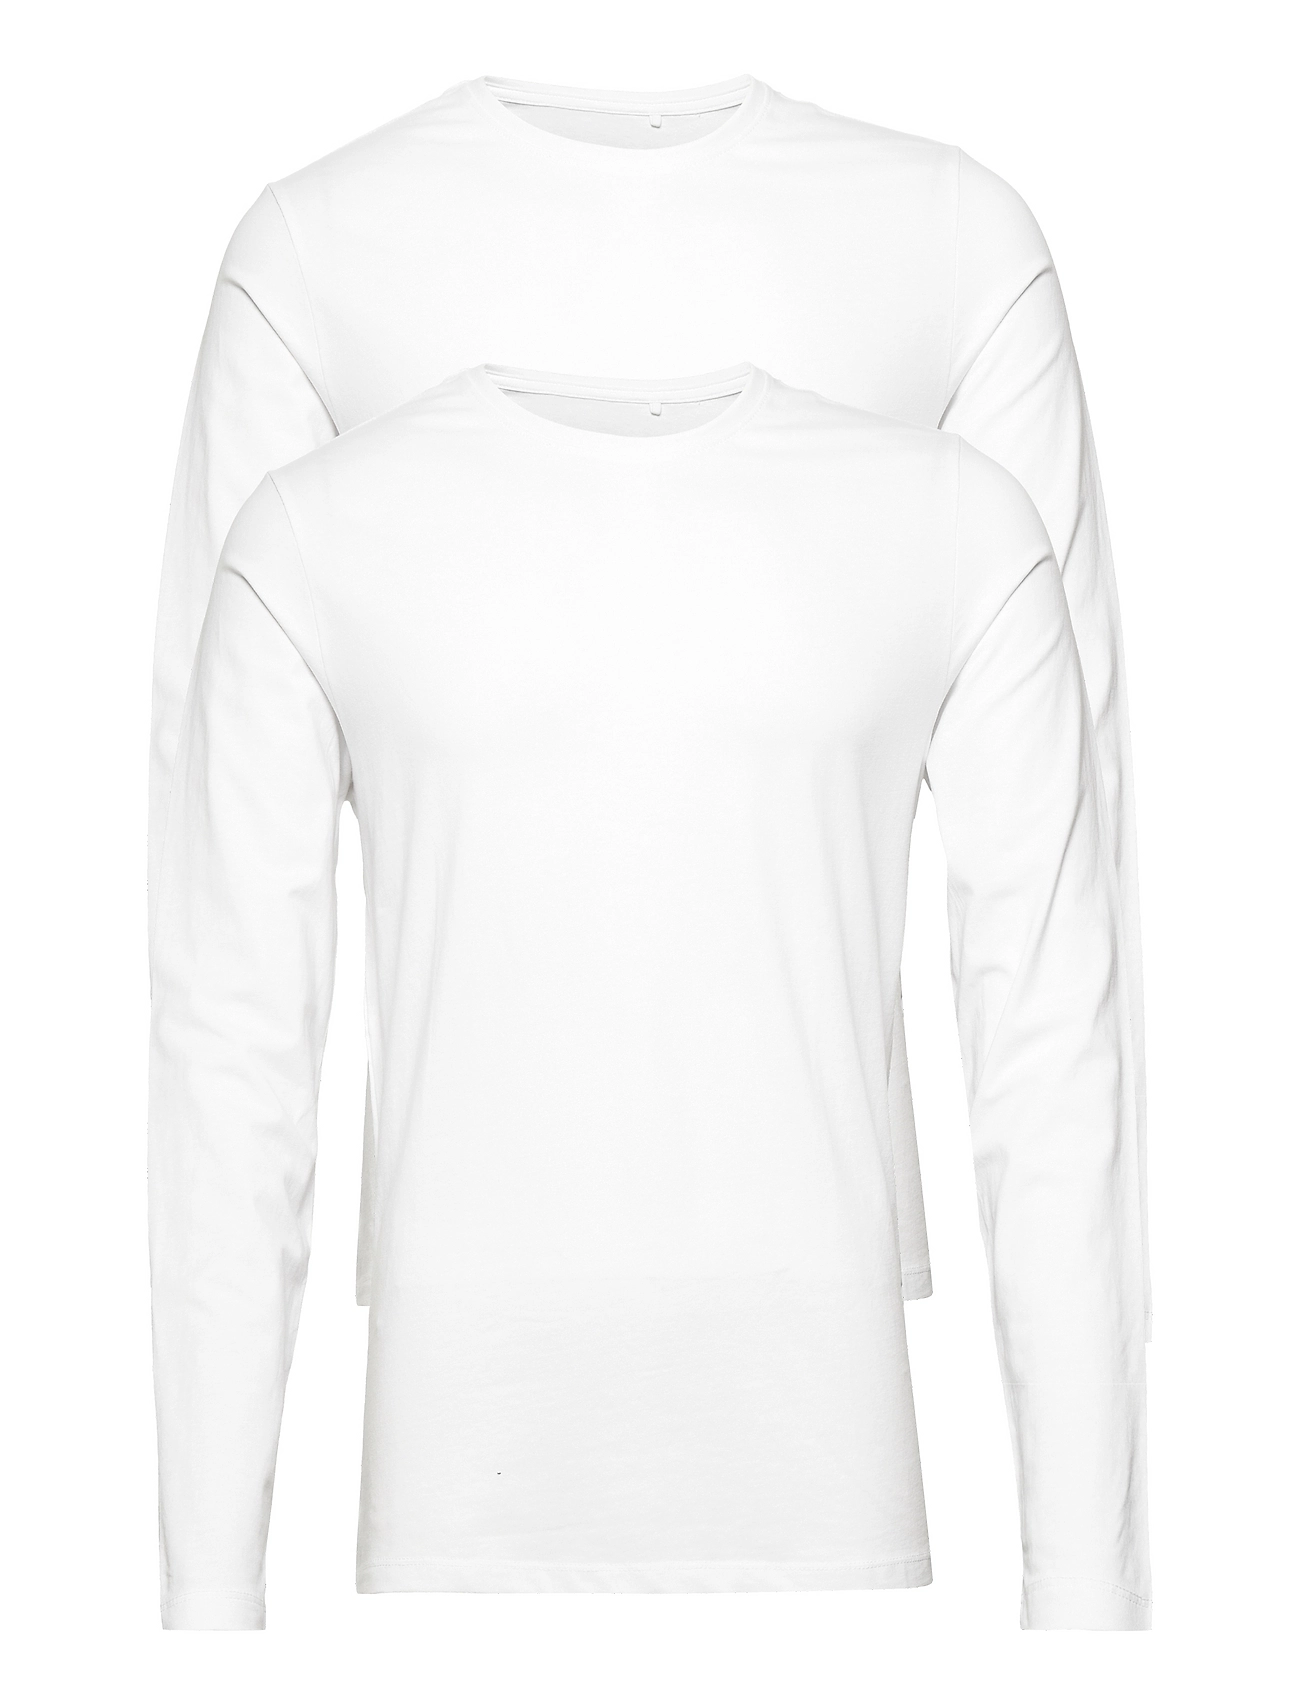 Long-sleeved Blend t-shirts Bhdinton Neck Crew 2-pack - Ls